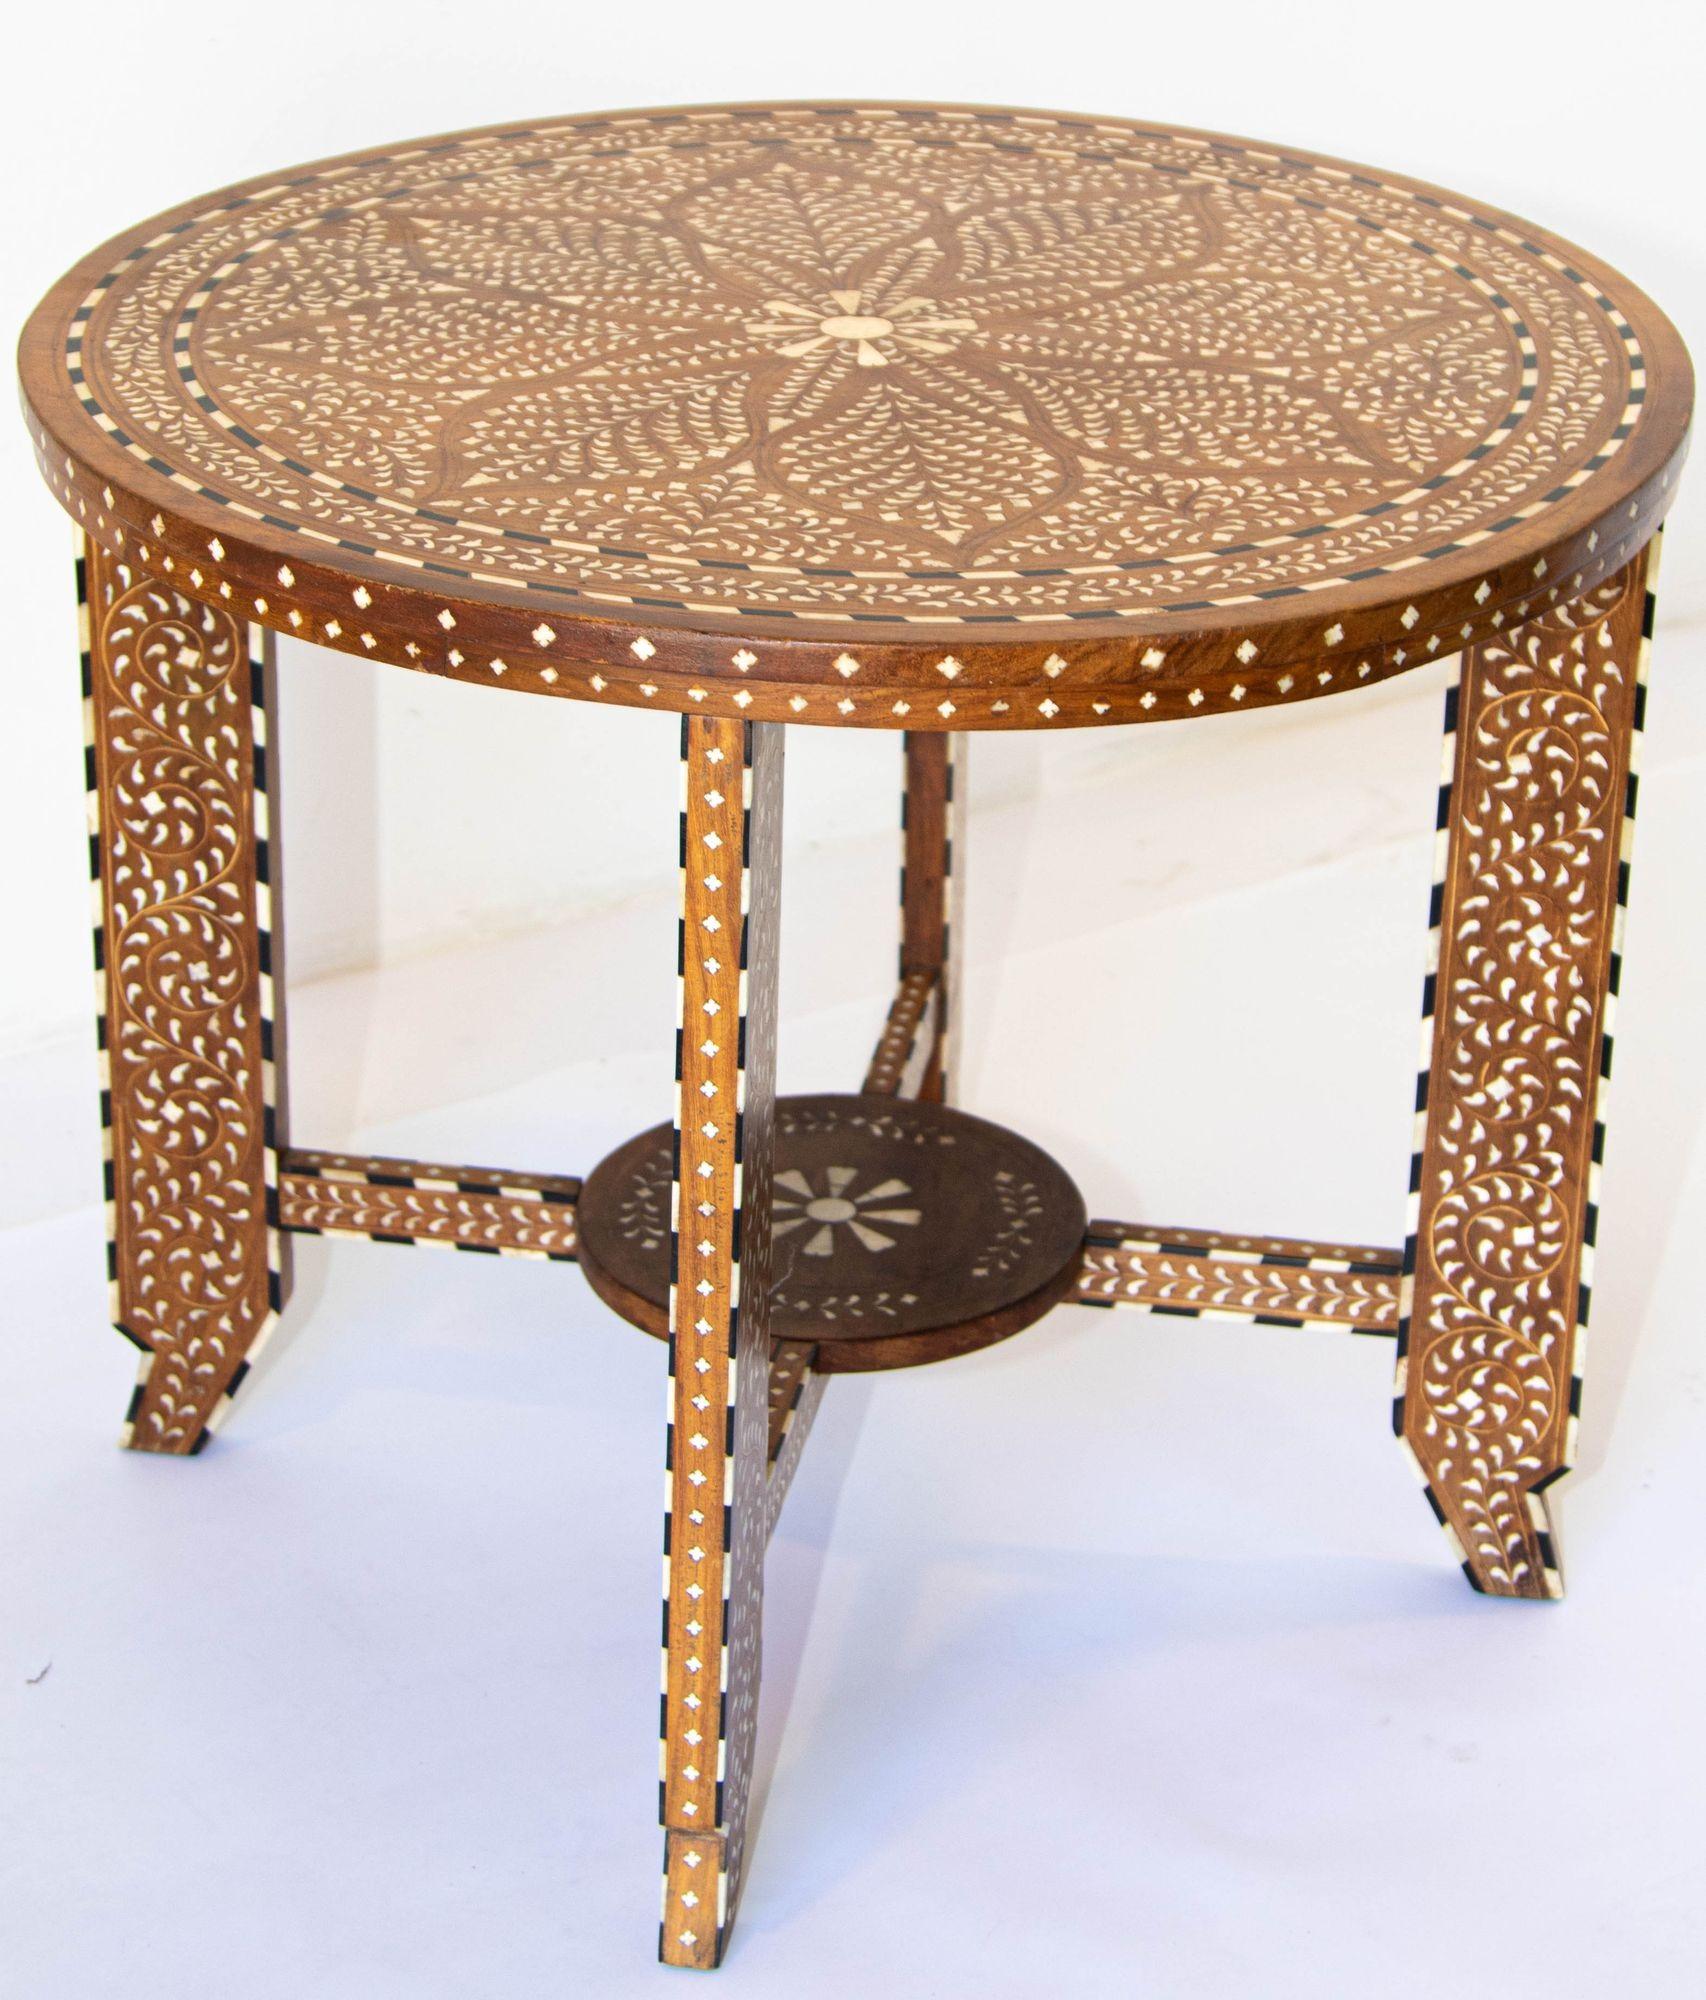 Anglo Indian Mughal teak wood round side table heavily inlaid with camel bone.
Handcrafted from solid wood, this gorgeous piece showcases an intricate bone inlaid that displays a beautiful visual contrast on the table top and feet.
Indian occasional